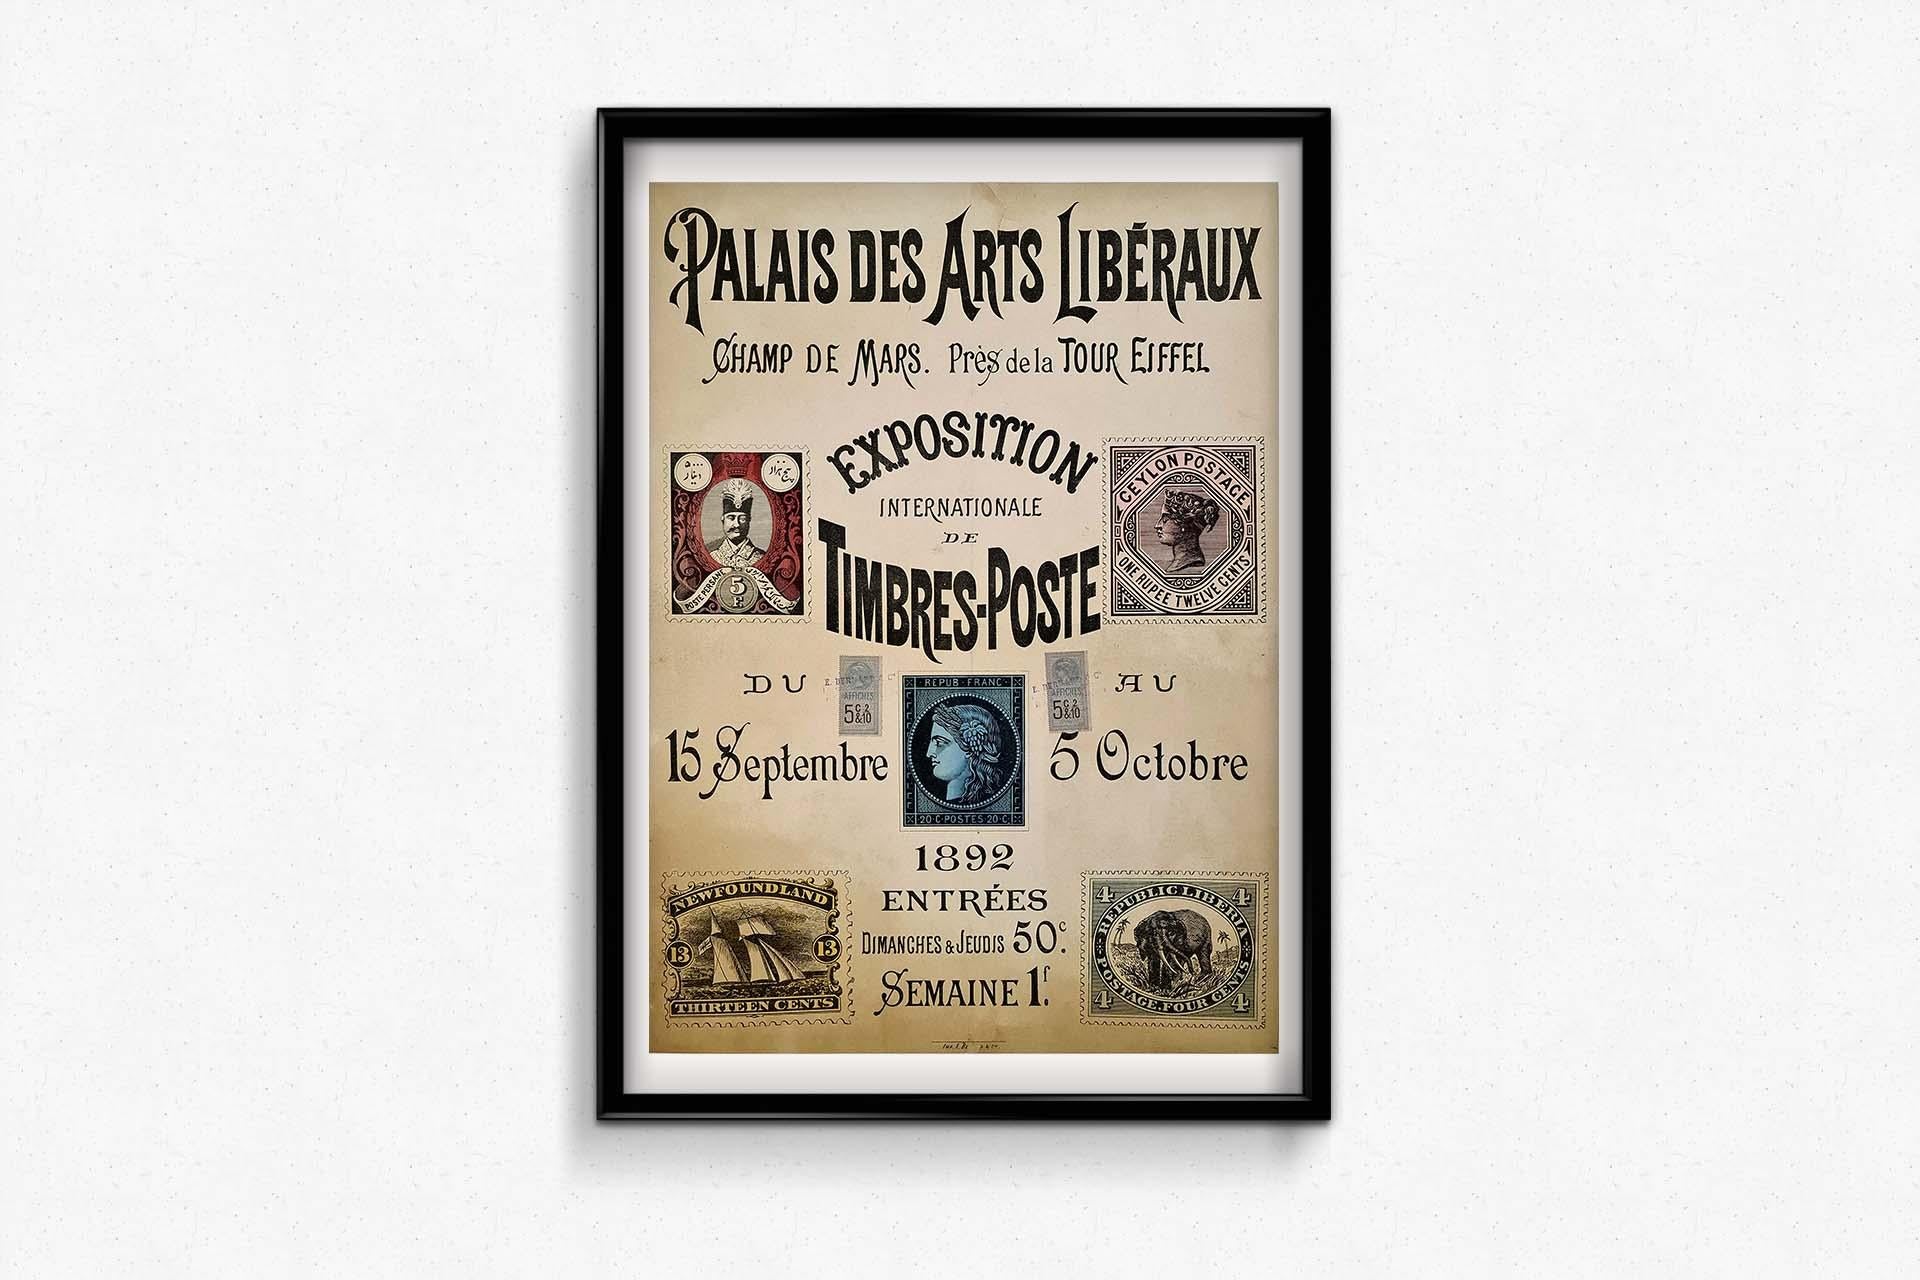 The 1892 Exposition Internationale Timbres-Poste poster, an enduring masterpiece, encapsulates the elegance and artistic sensibilities of its time. Created in an era marked by innovation and global exchange, this poster remains a symbol of the